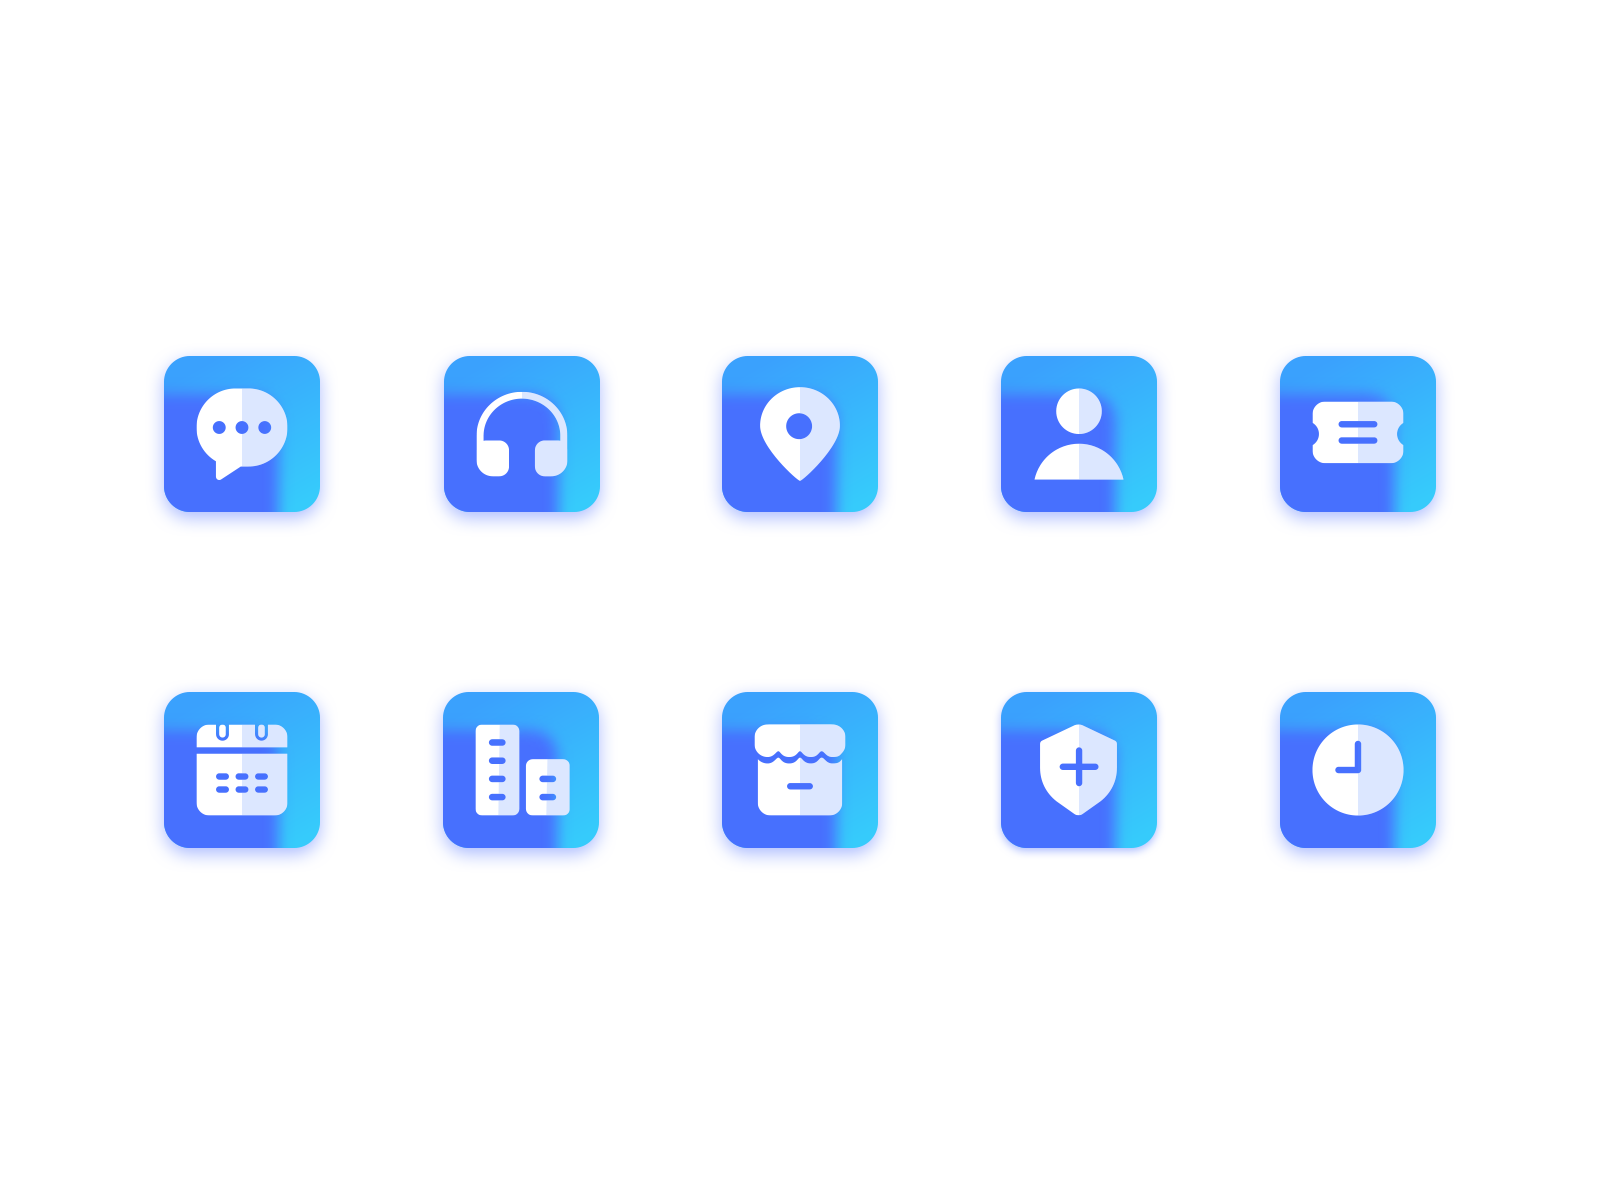 Icons by Sweet_panda on Dribbble